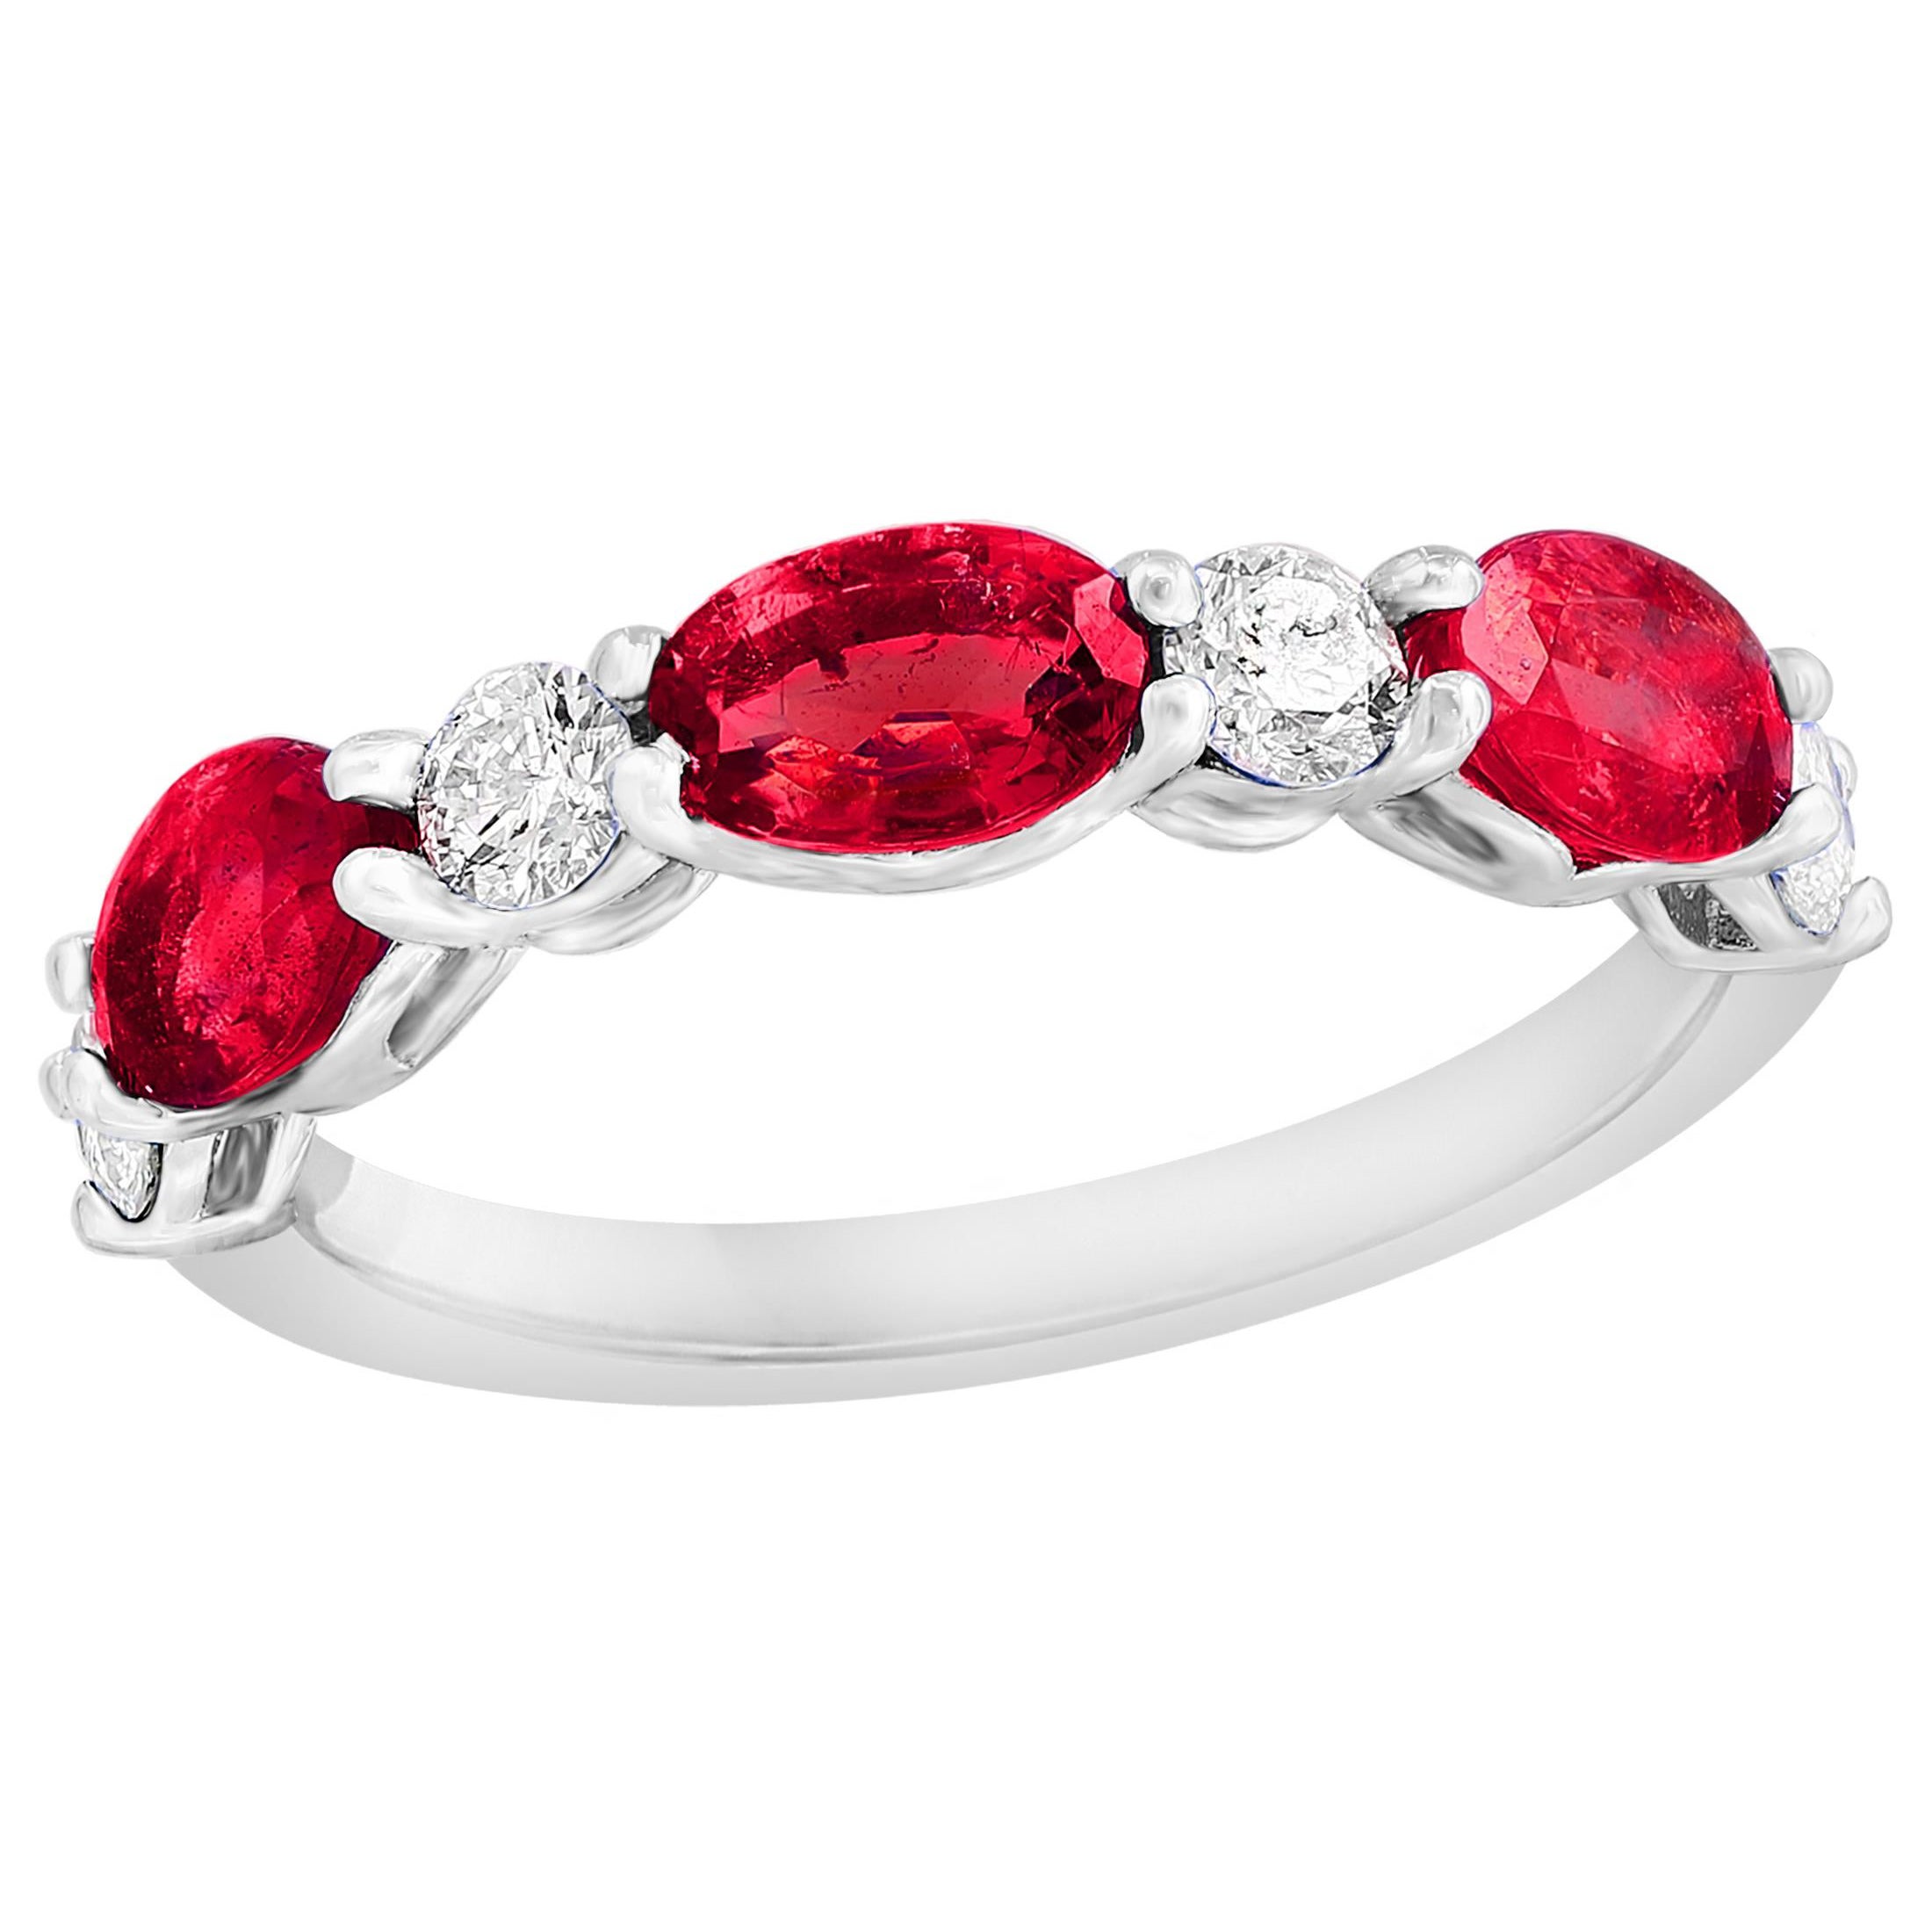 1.71 Carat Oval Cut Ruby and Diamond Band in 14K White Gold For Sale